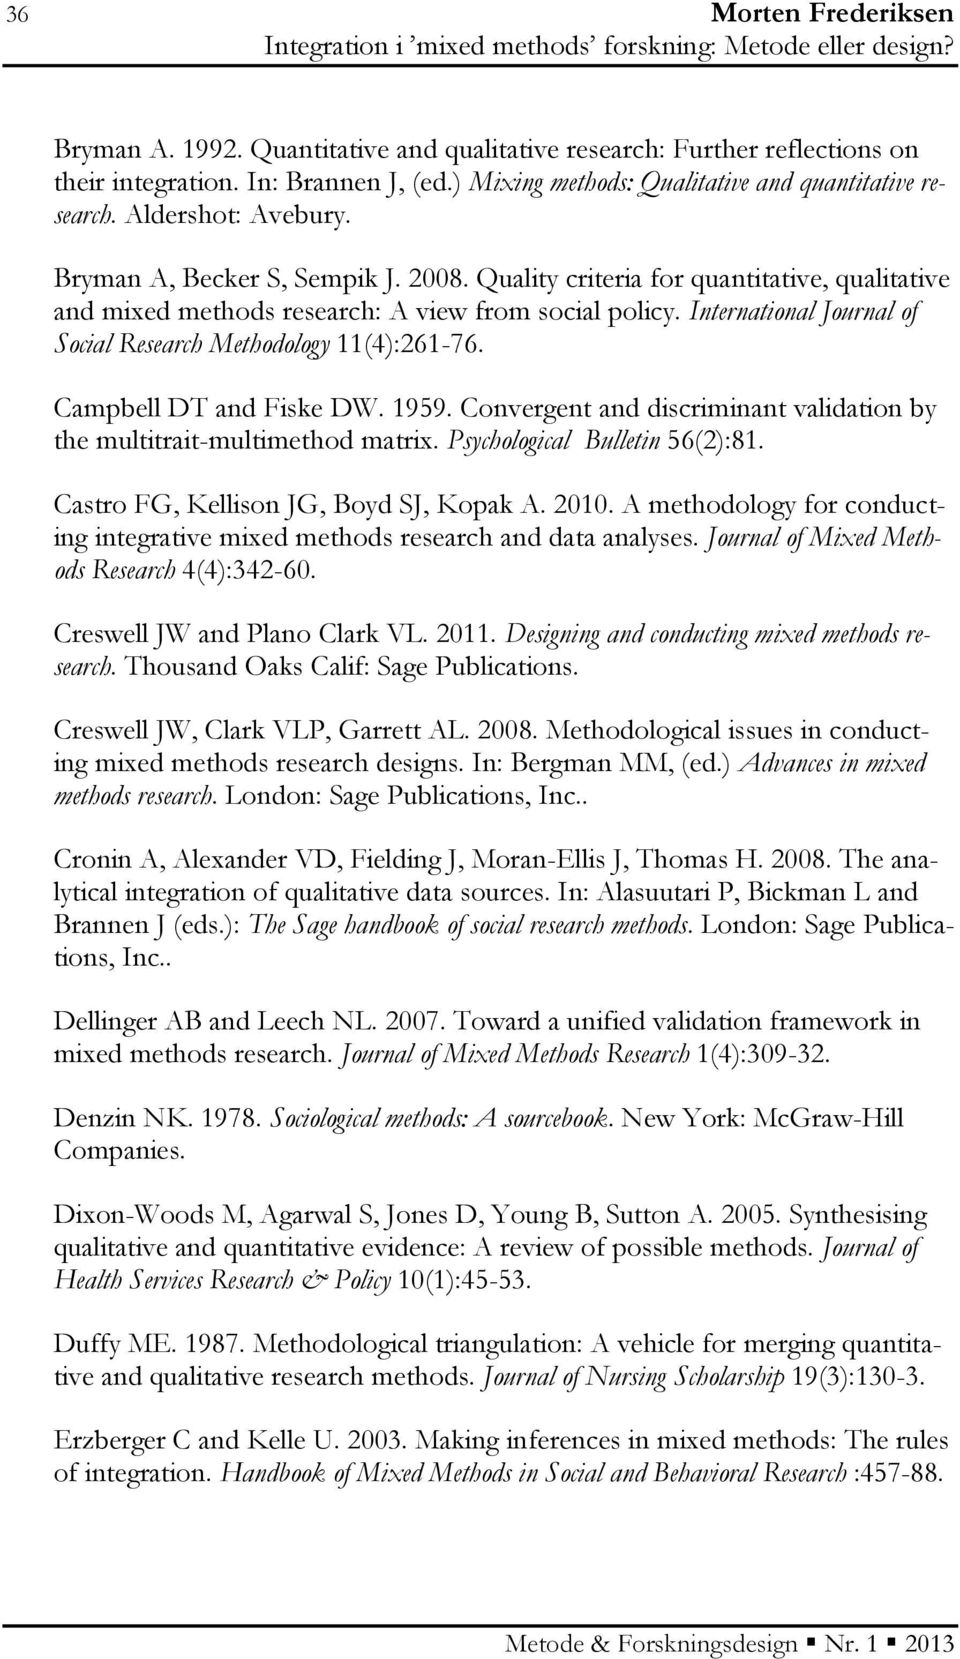 International Journal of Social Research Methodology 11(4):261-76. Campbell DT and Fiske DW. 1959. Convergent and discriminant validation by the multitrait-multimethod matrix.